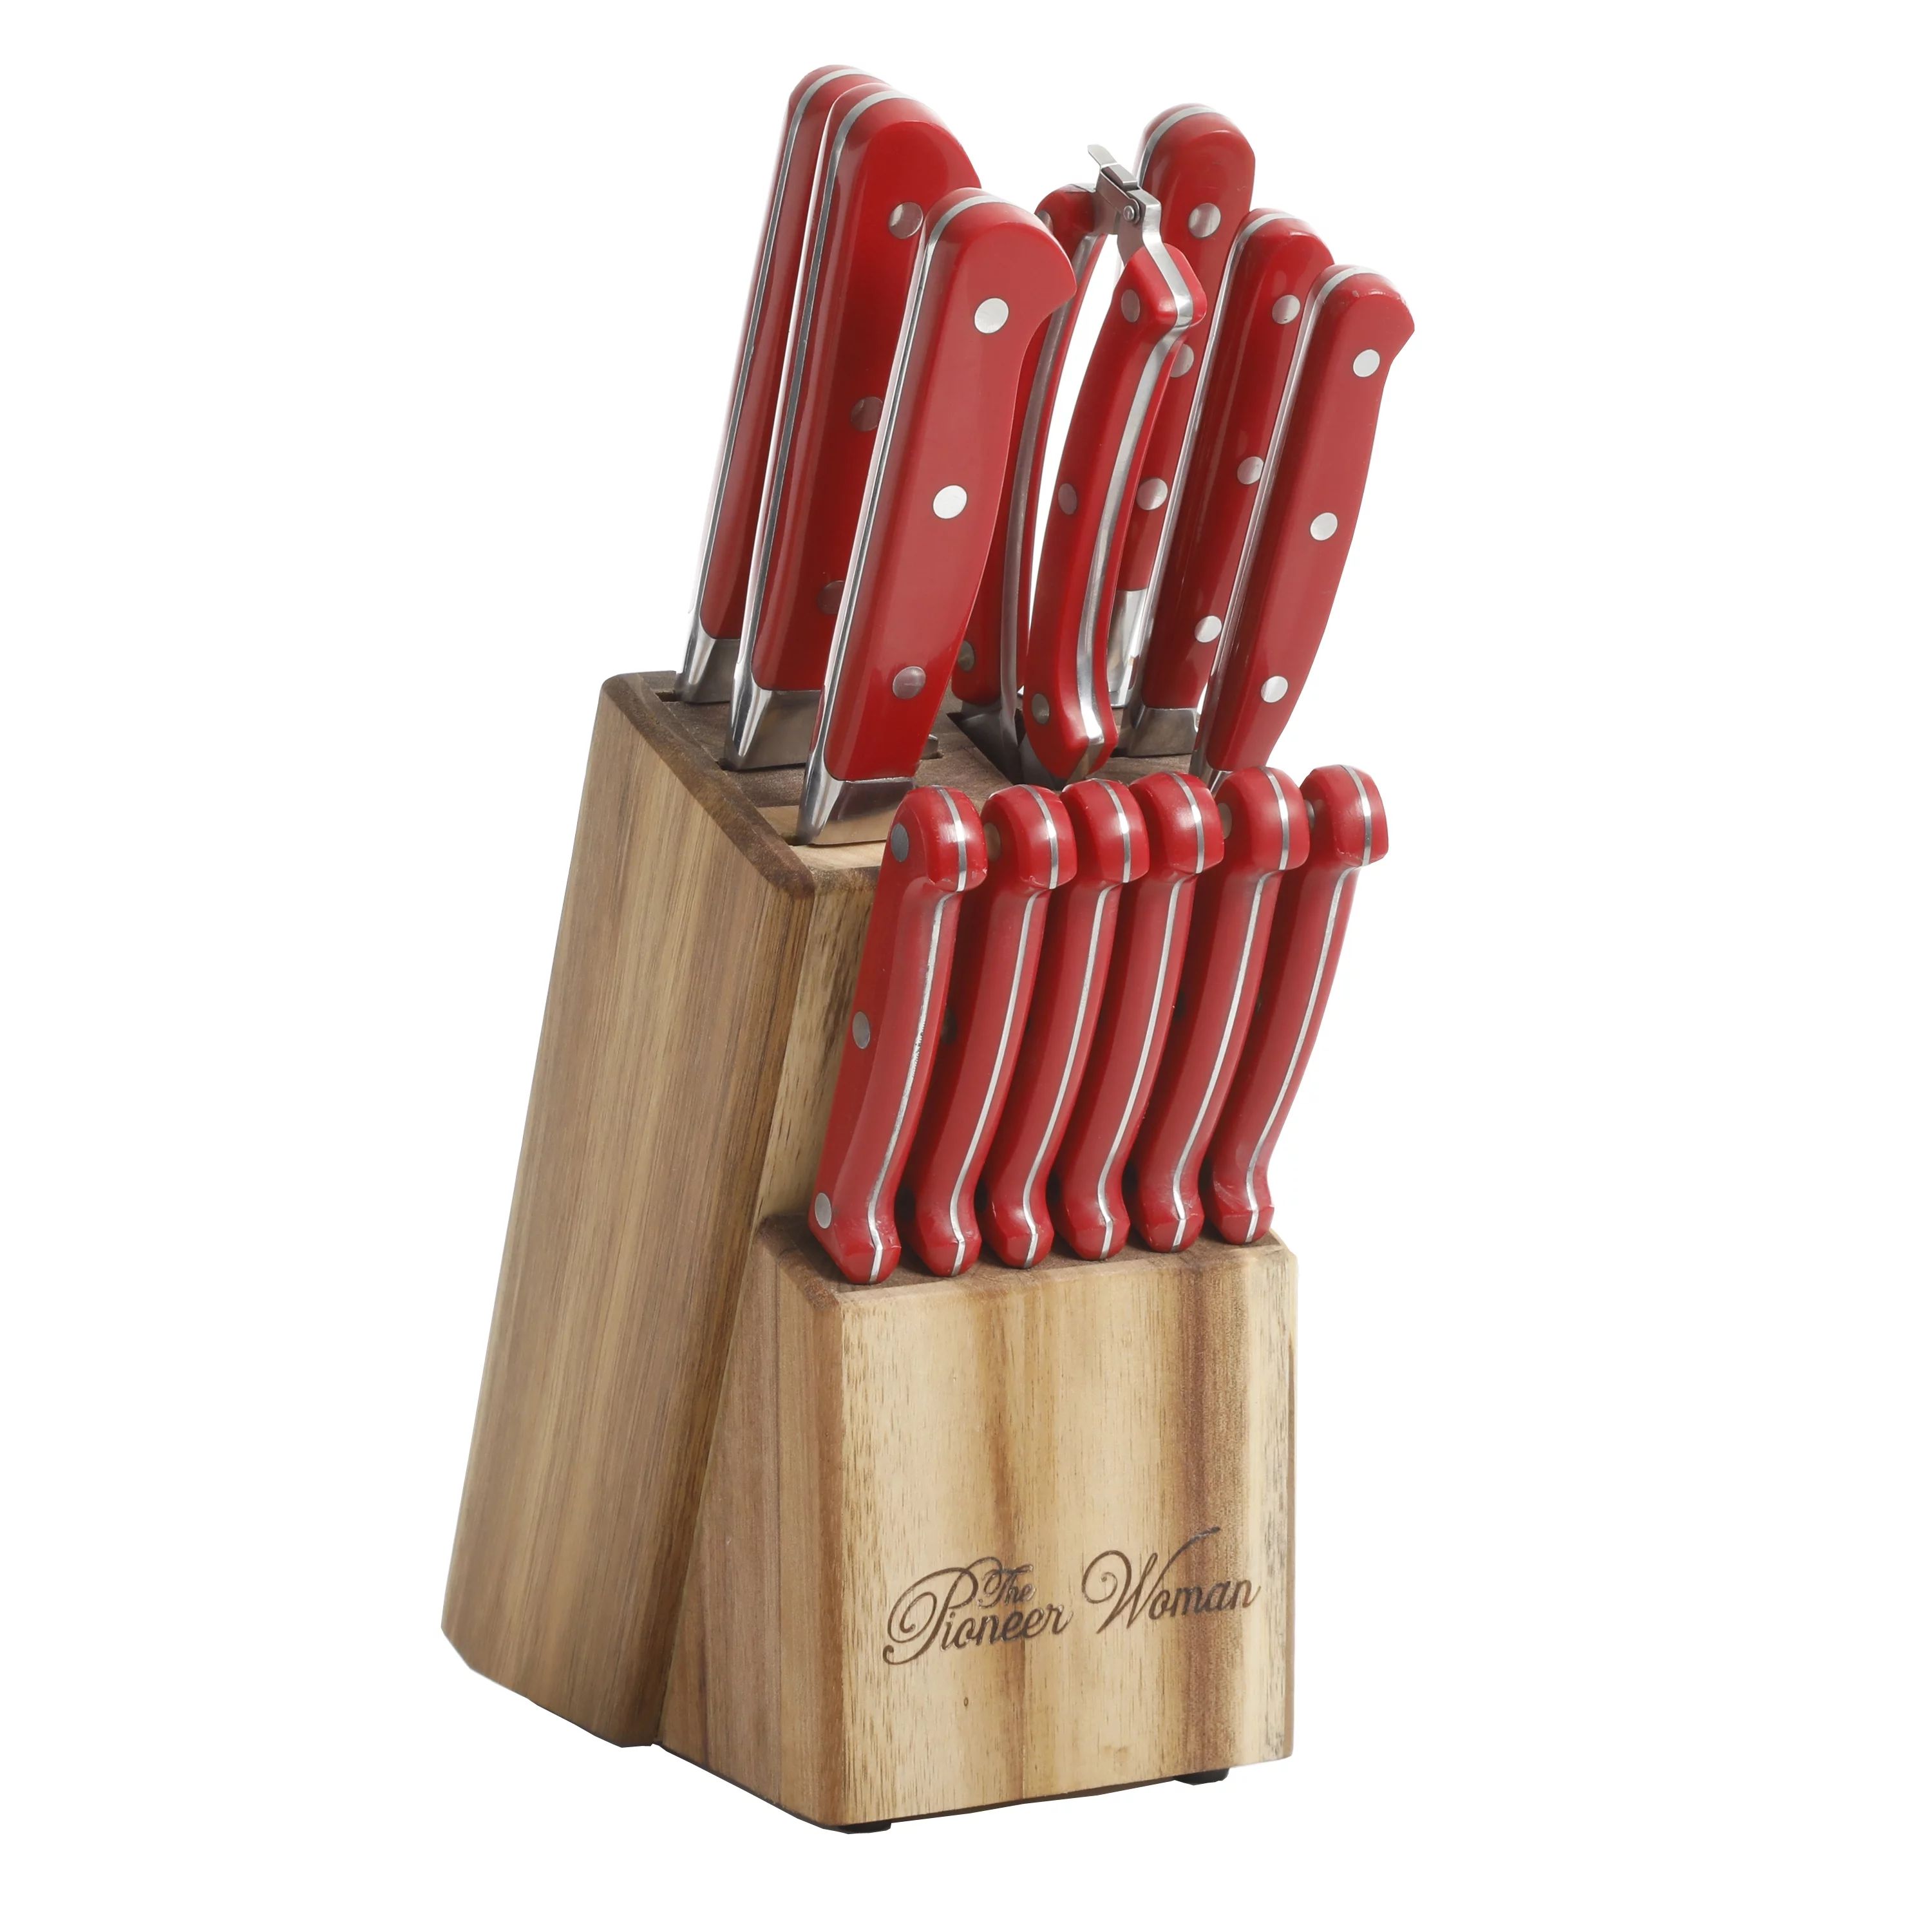 The Pioneer Woman Cowboy Rustic 14-Piece Forged Cutlery Knife Block Set, Red | Walmart (US)